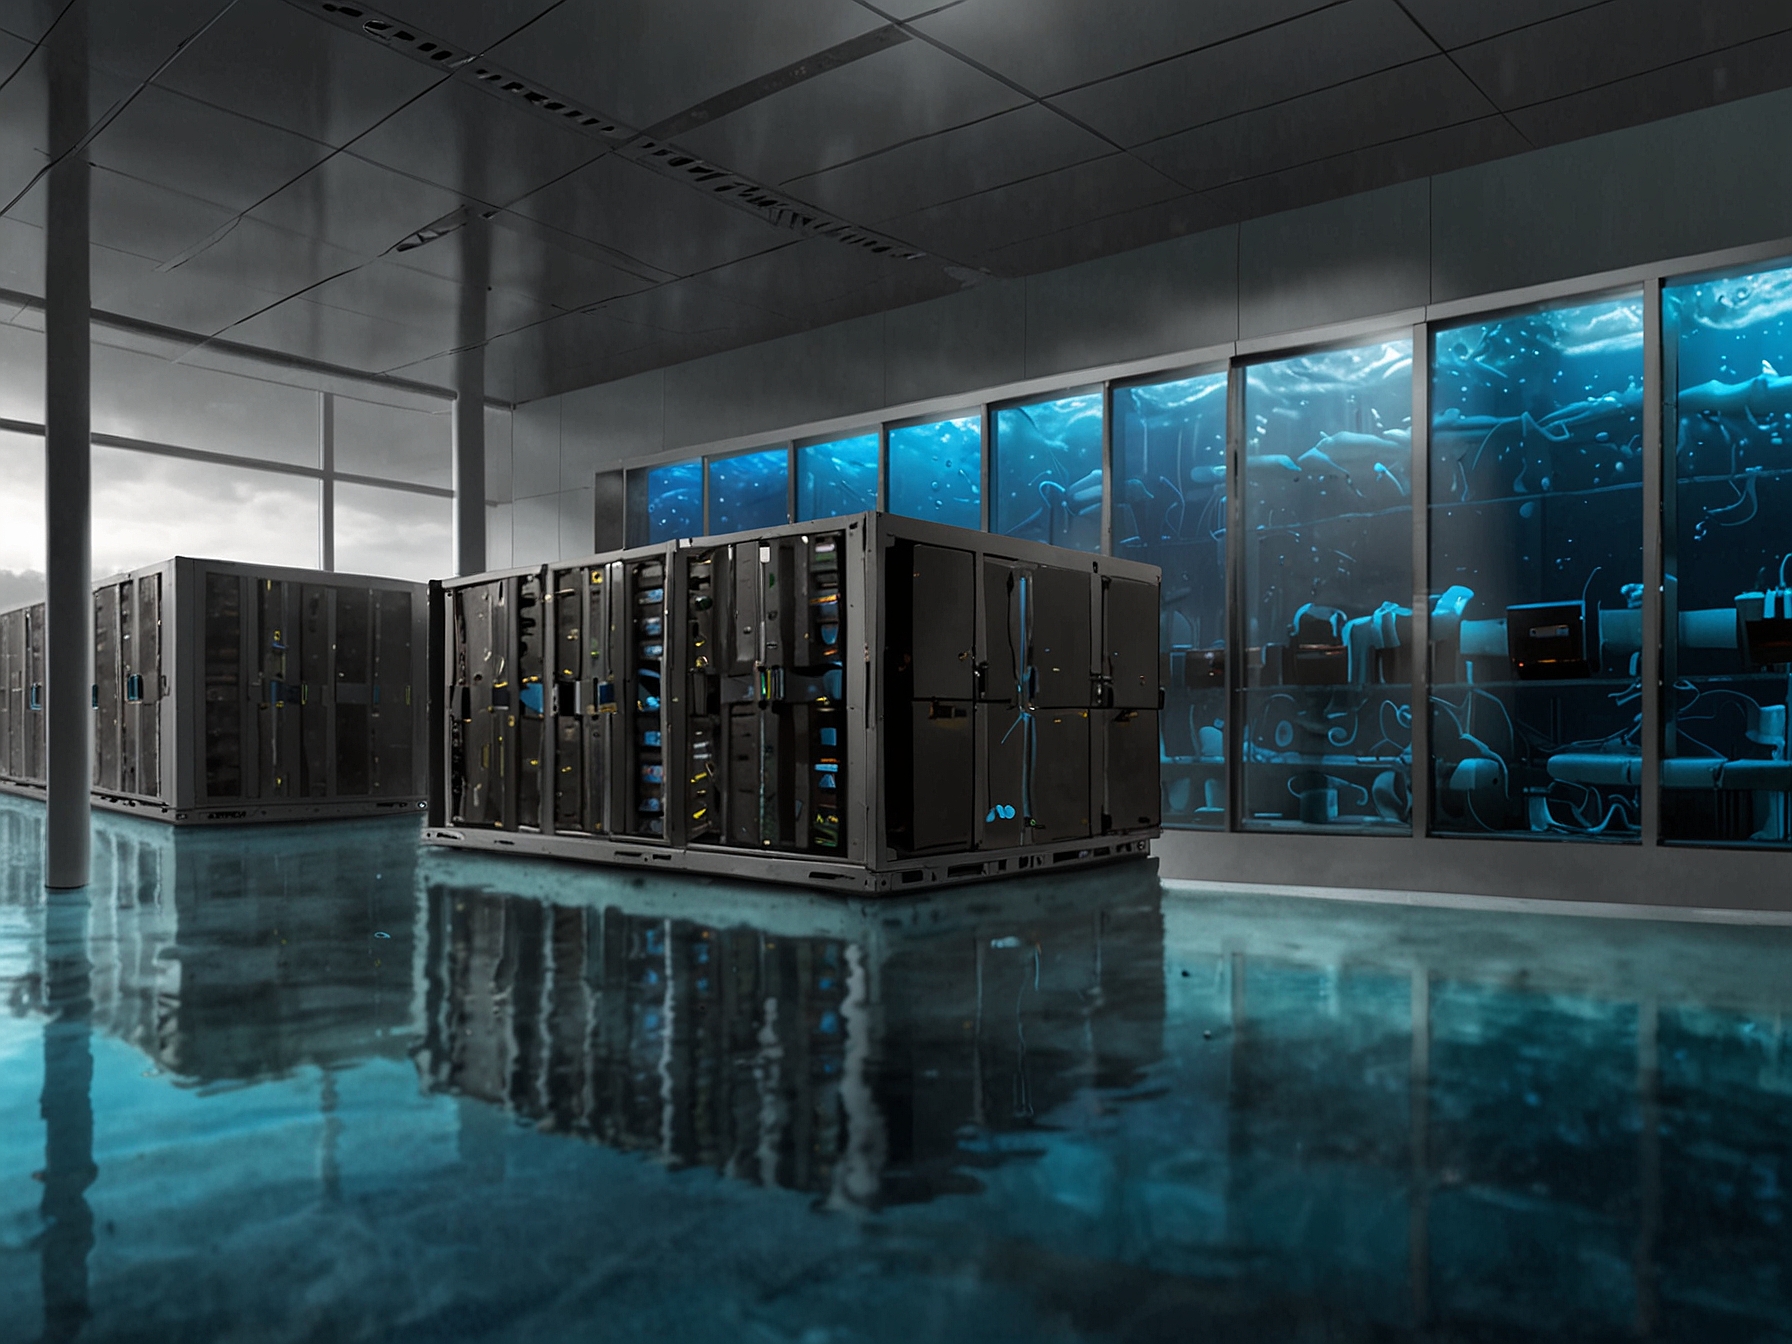 A visual comparison of traditional land-based data centers and Microsoft's underwater data center, emphasizing the natural cooling benefits and lower failure rates observed in Project Natick.